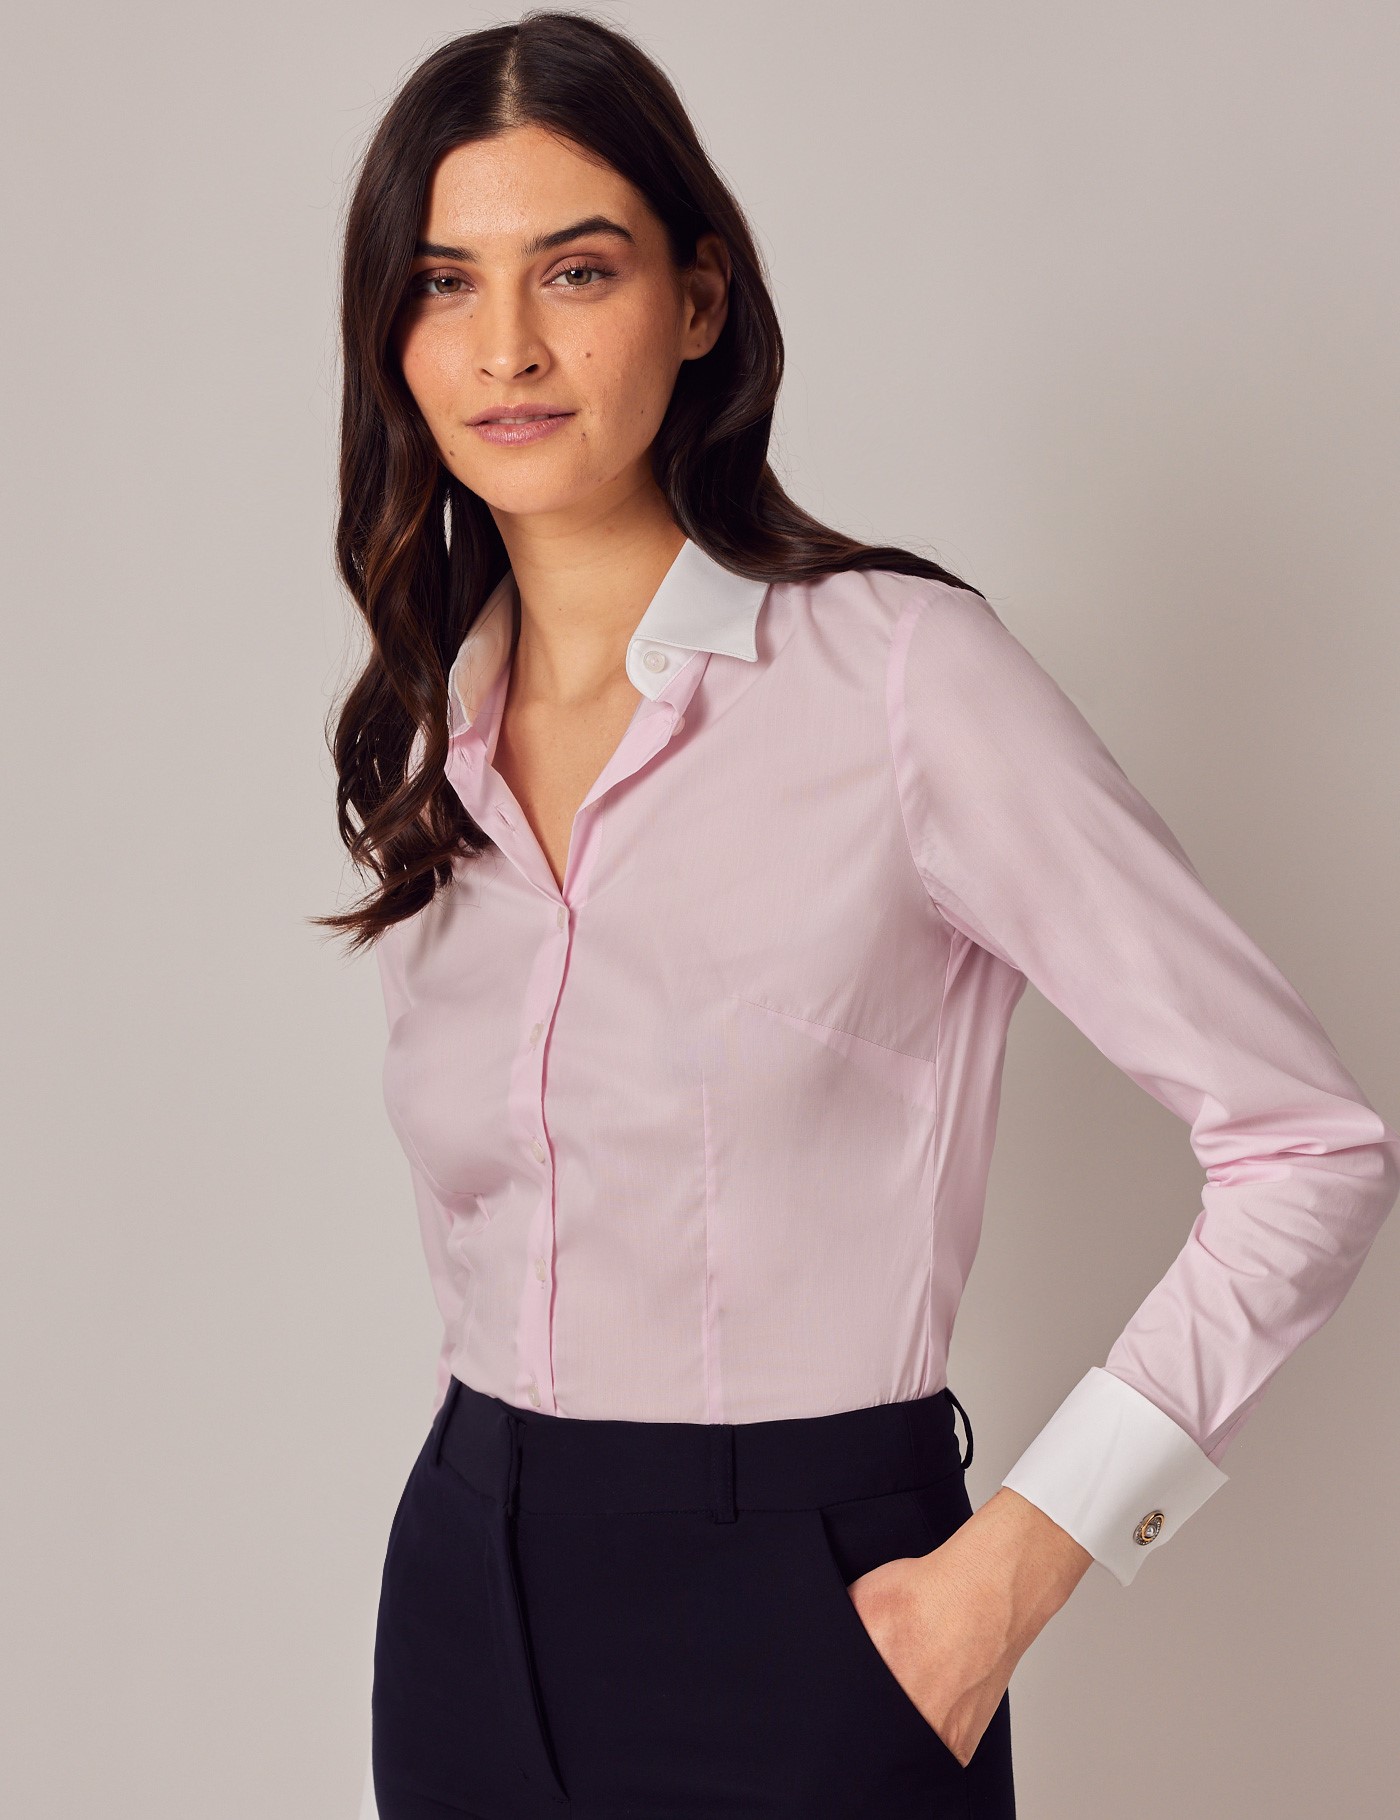 Women's Light Pink Fitted Luxury Cotton Nylon Shirt With White Collar ...